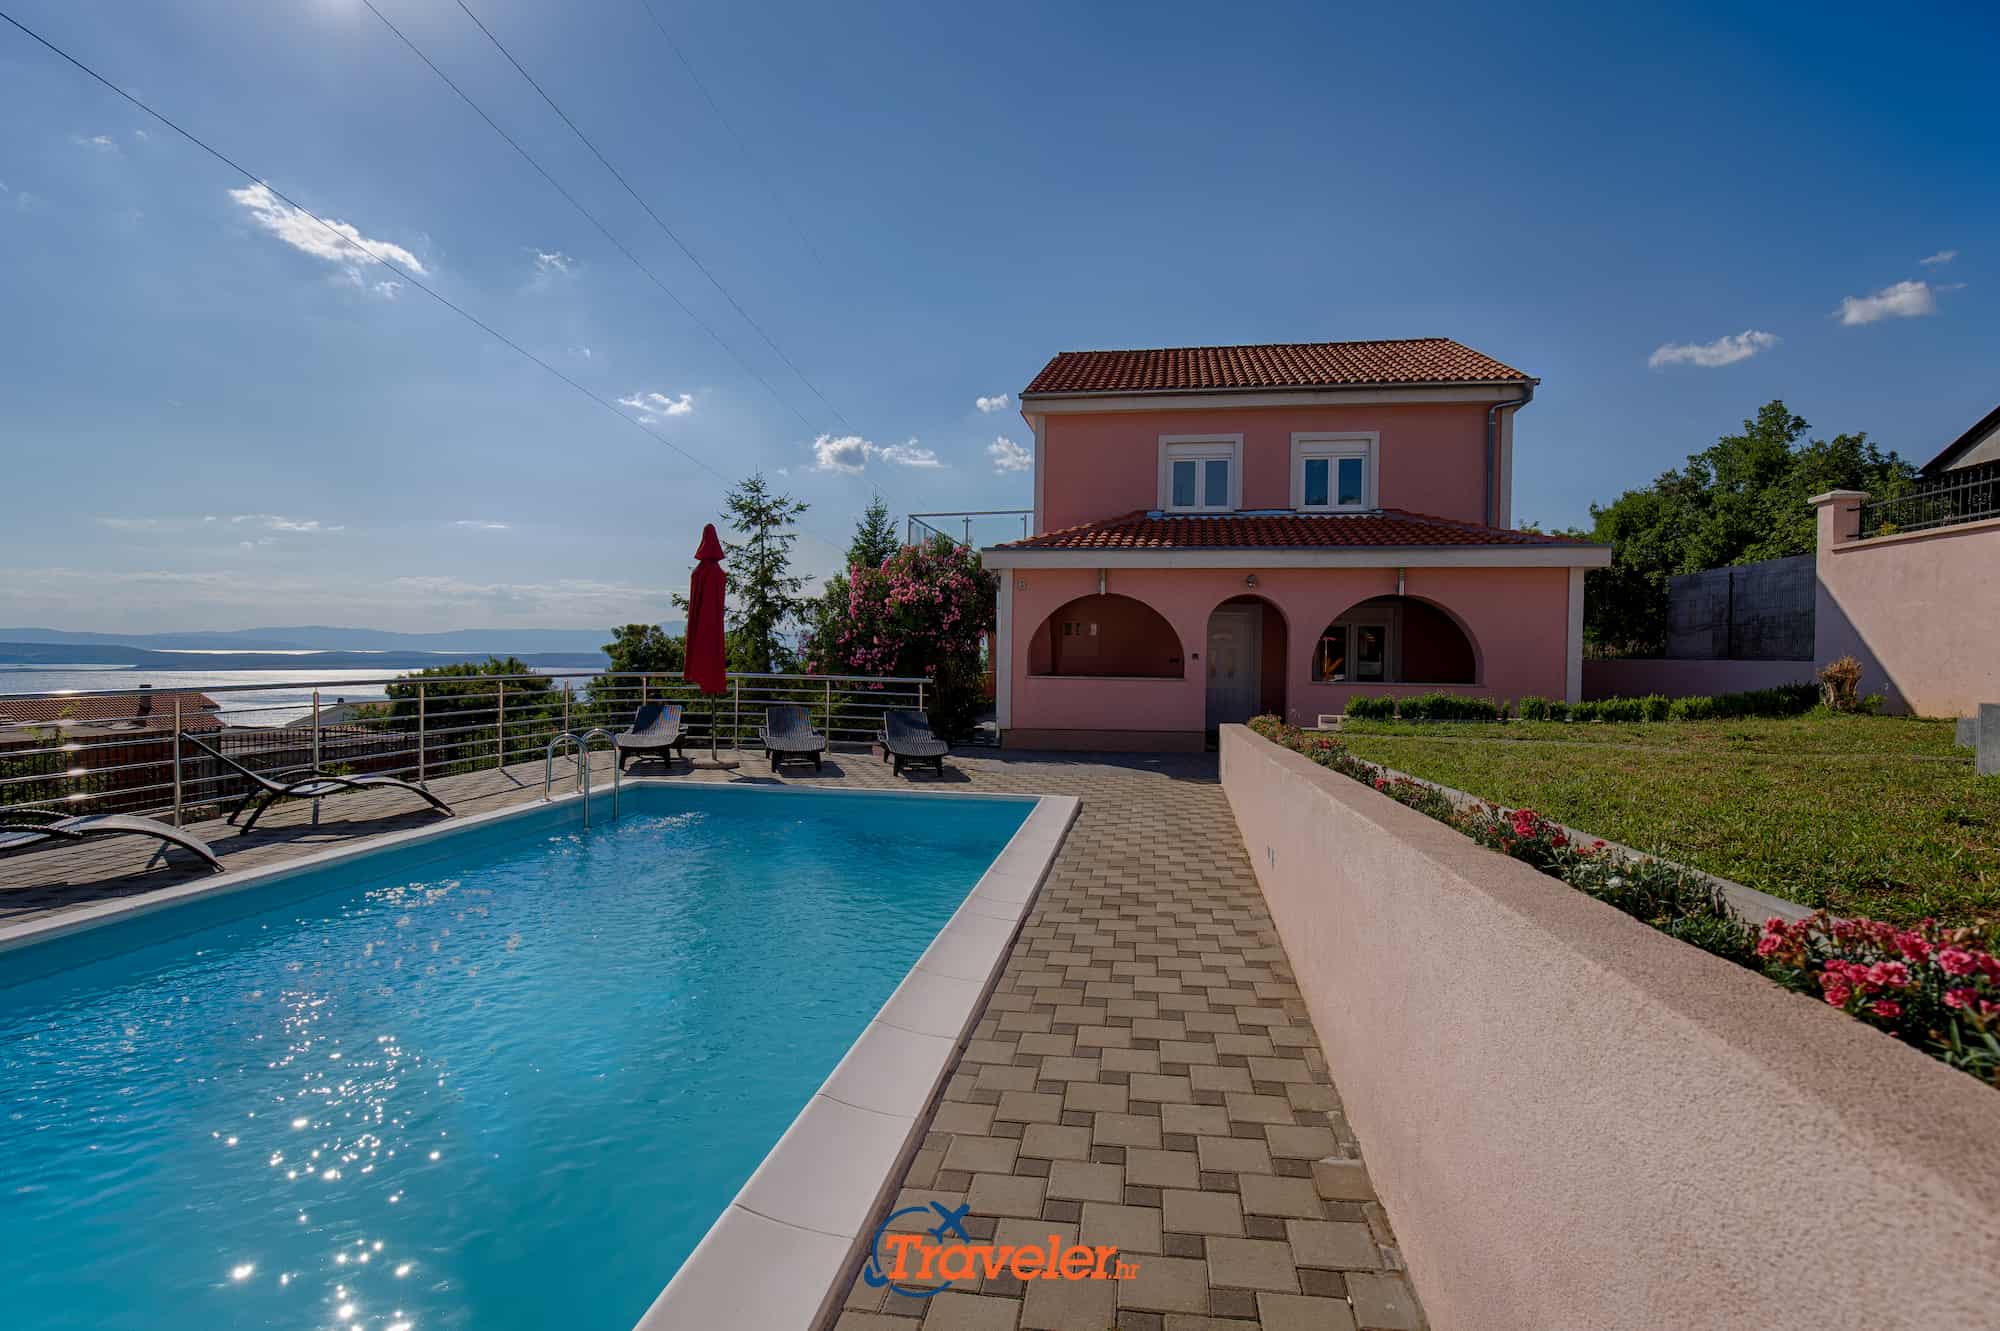 Villa with pool, large garden and beautiful sea view